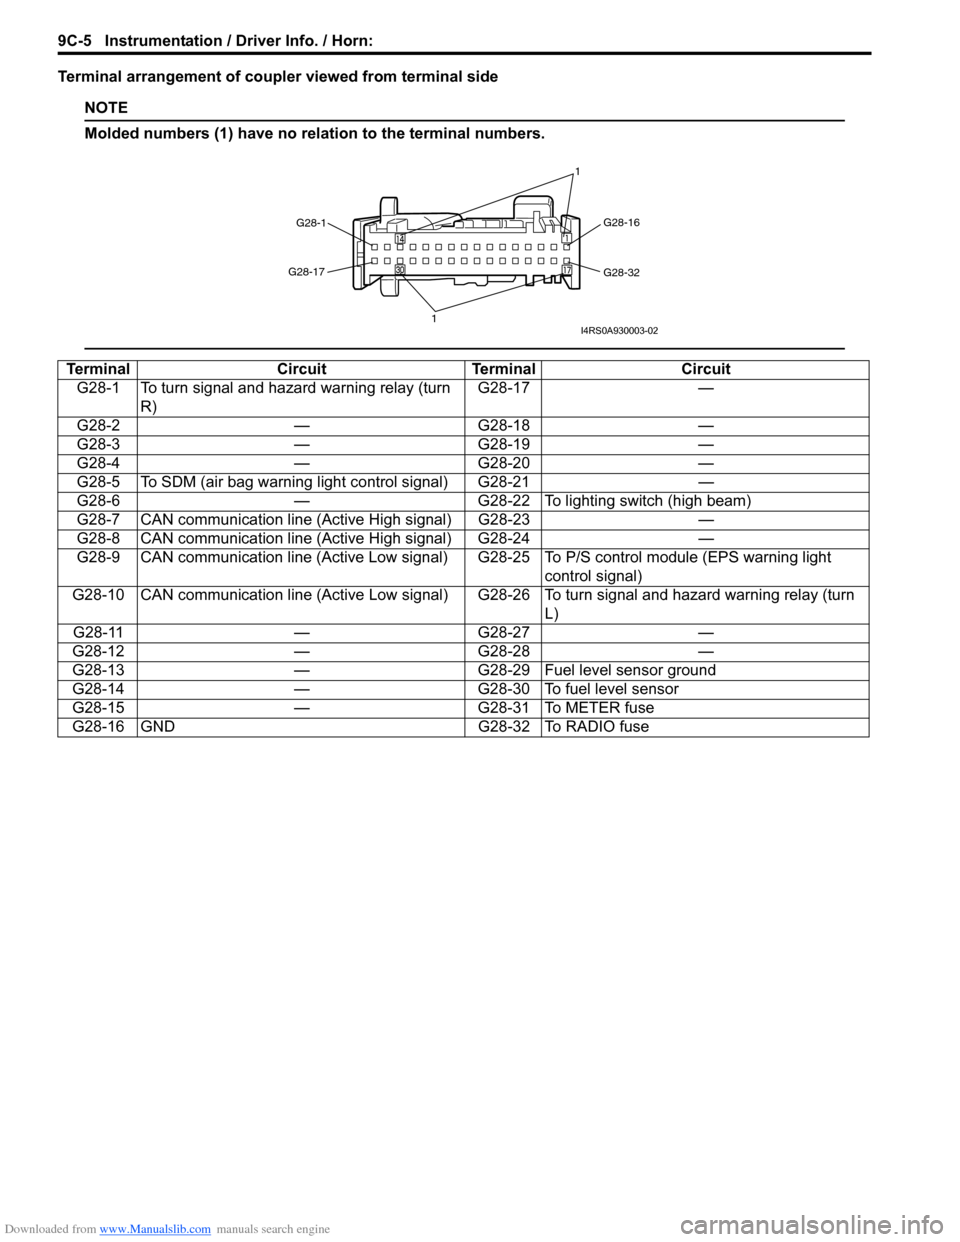 SUZUKI SWIFT 2006 2.G Service Workshop Manual Downloaded from www.Manualslib.com manuals search engine 9C-5 Instrumentation / Driver Info. / Horn: 
Terminal arrangement of coupler viewed from terminal side
NOTE
Molded numbers (1) have no relation